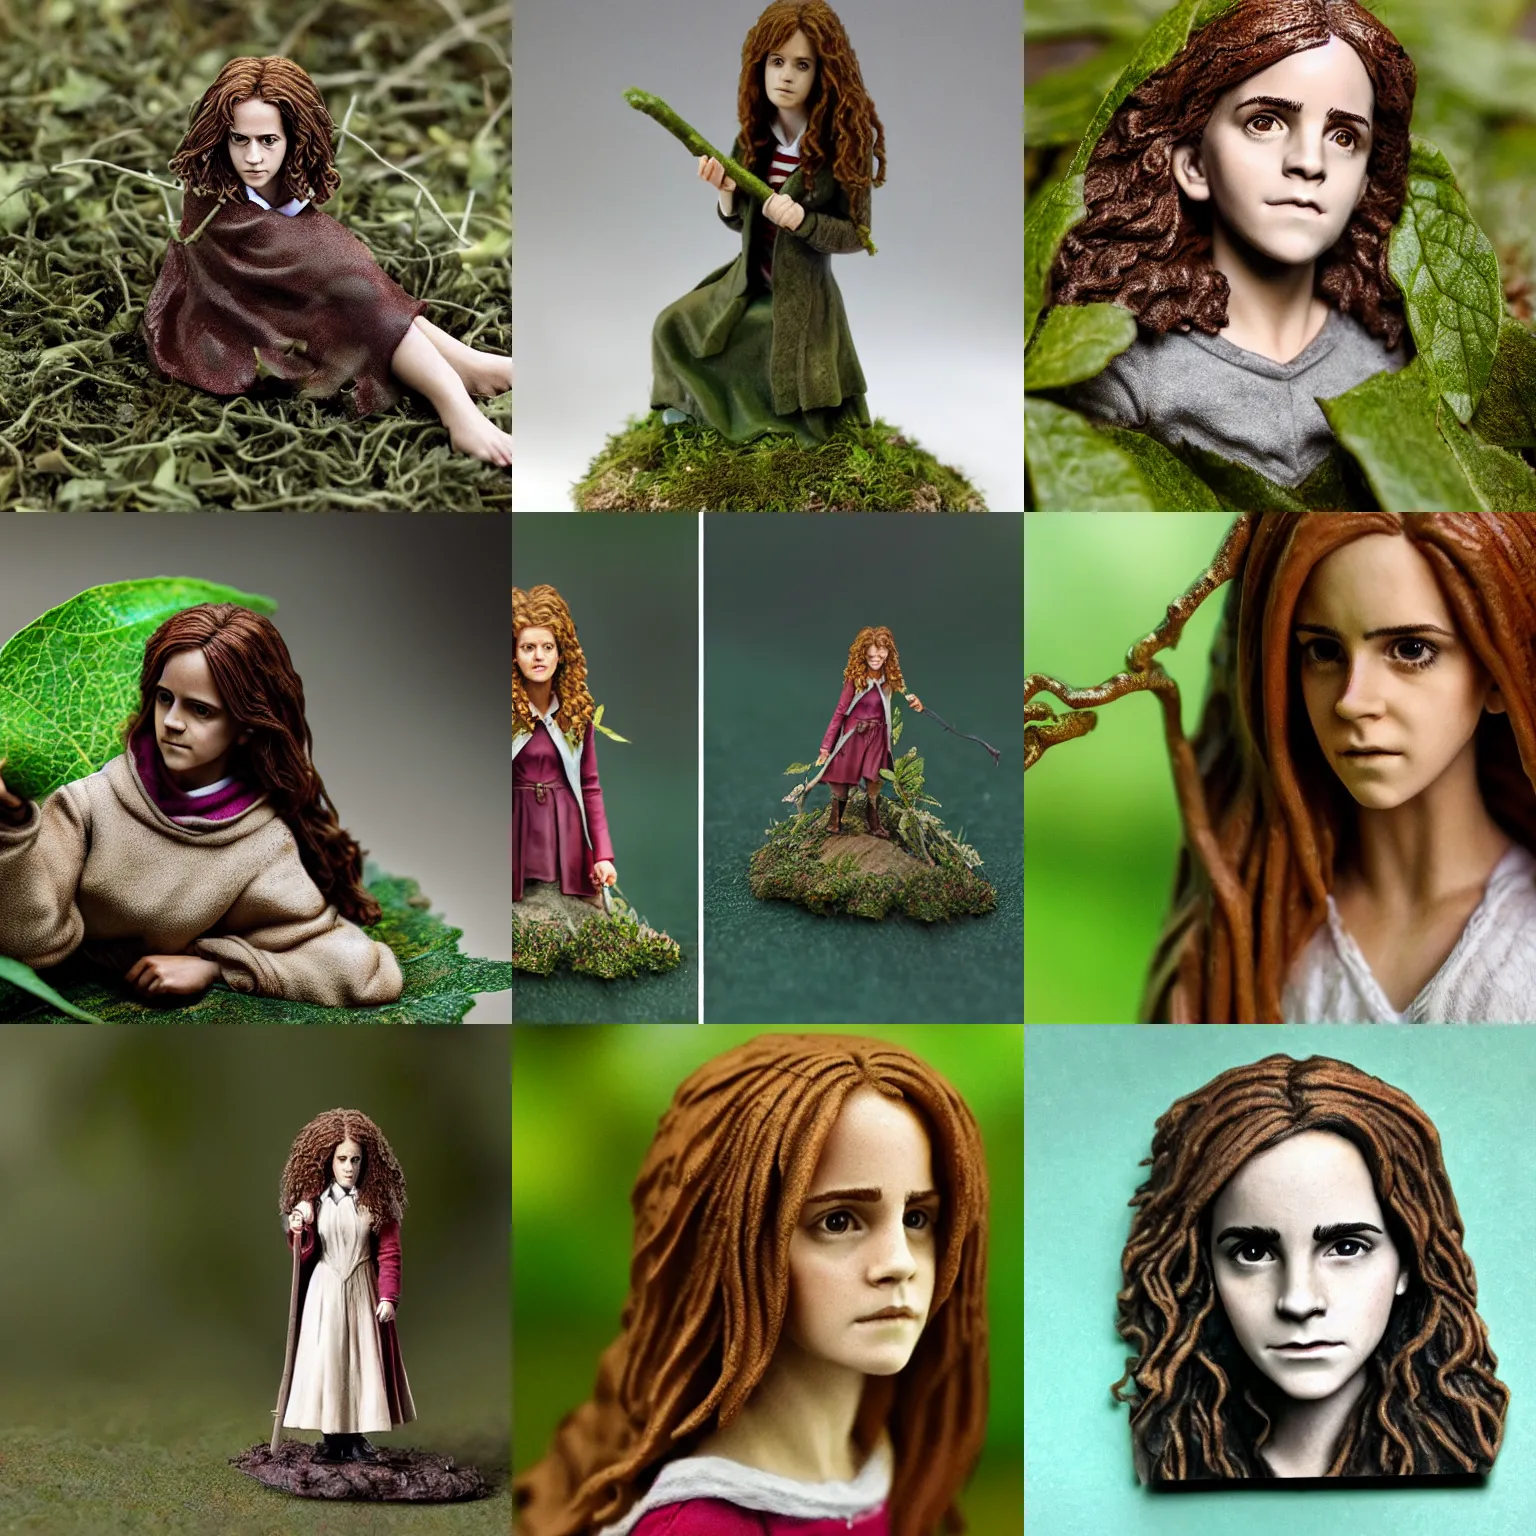 Prompt: Realistic miniature of Hermione Granger/Emma Watson, accurate proportions, sheltering under a leaf, macro photography